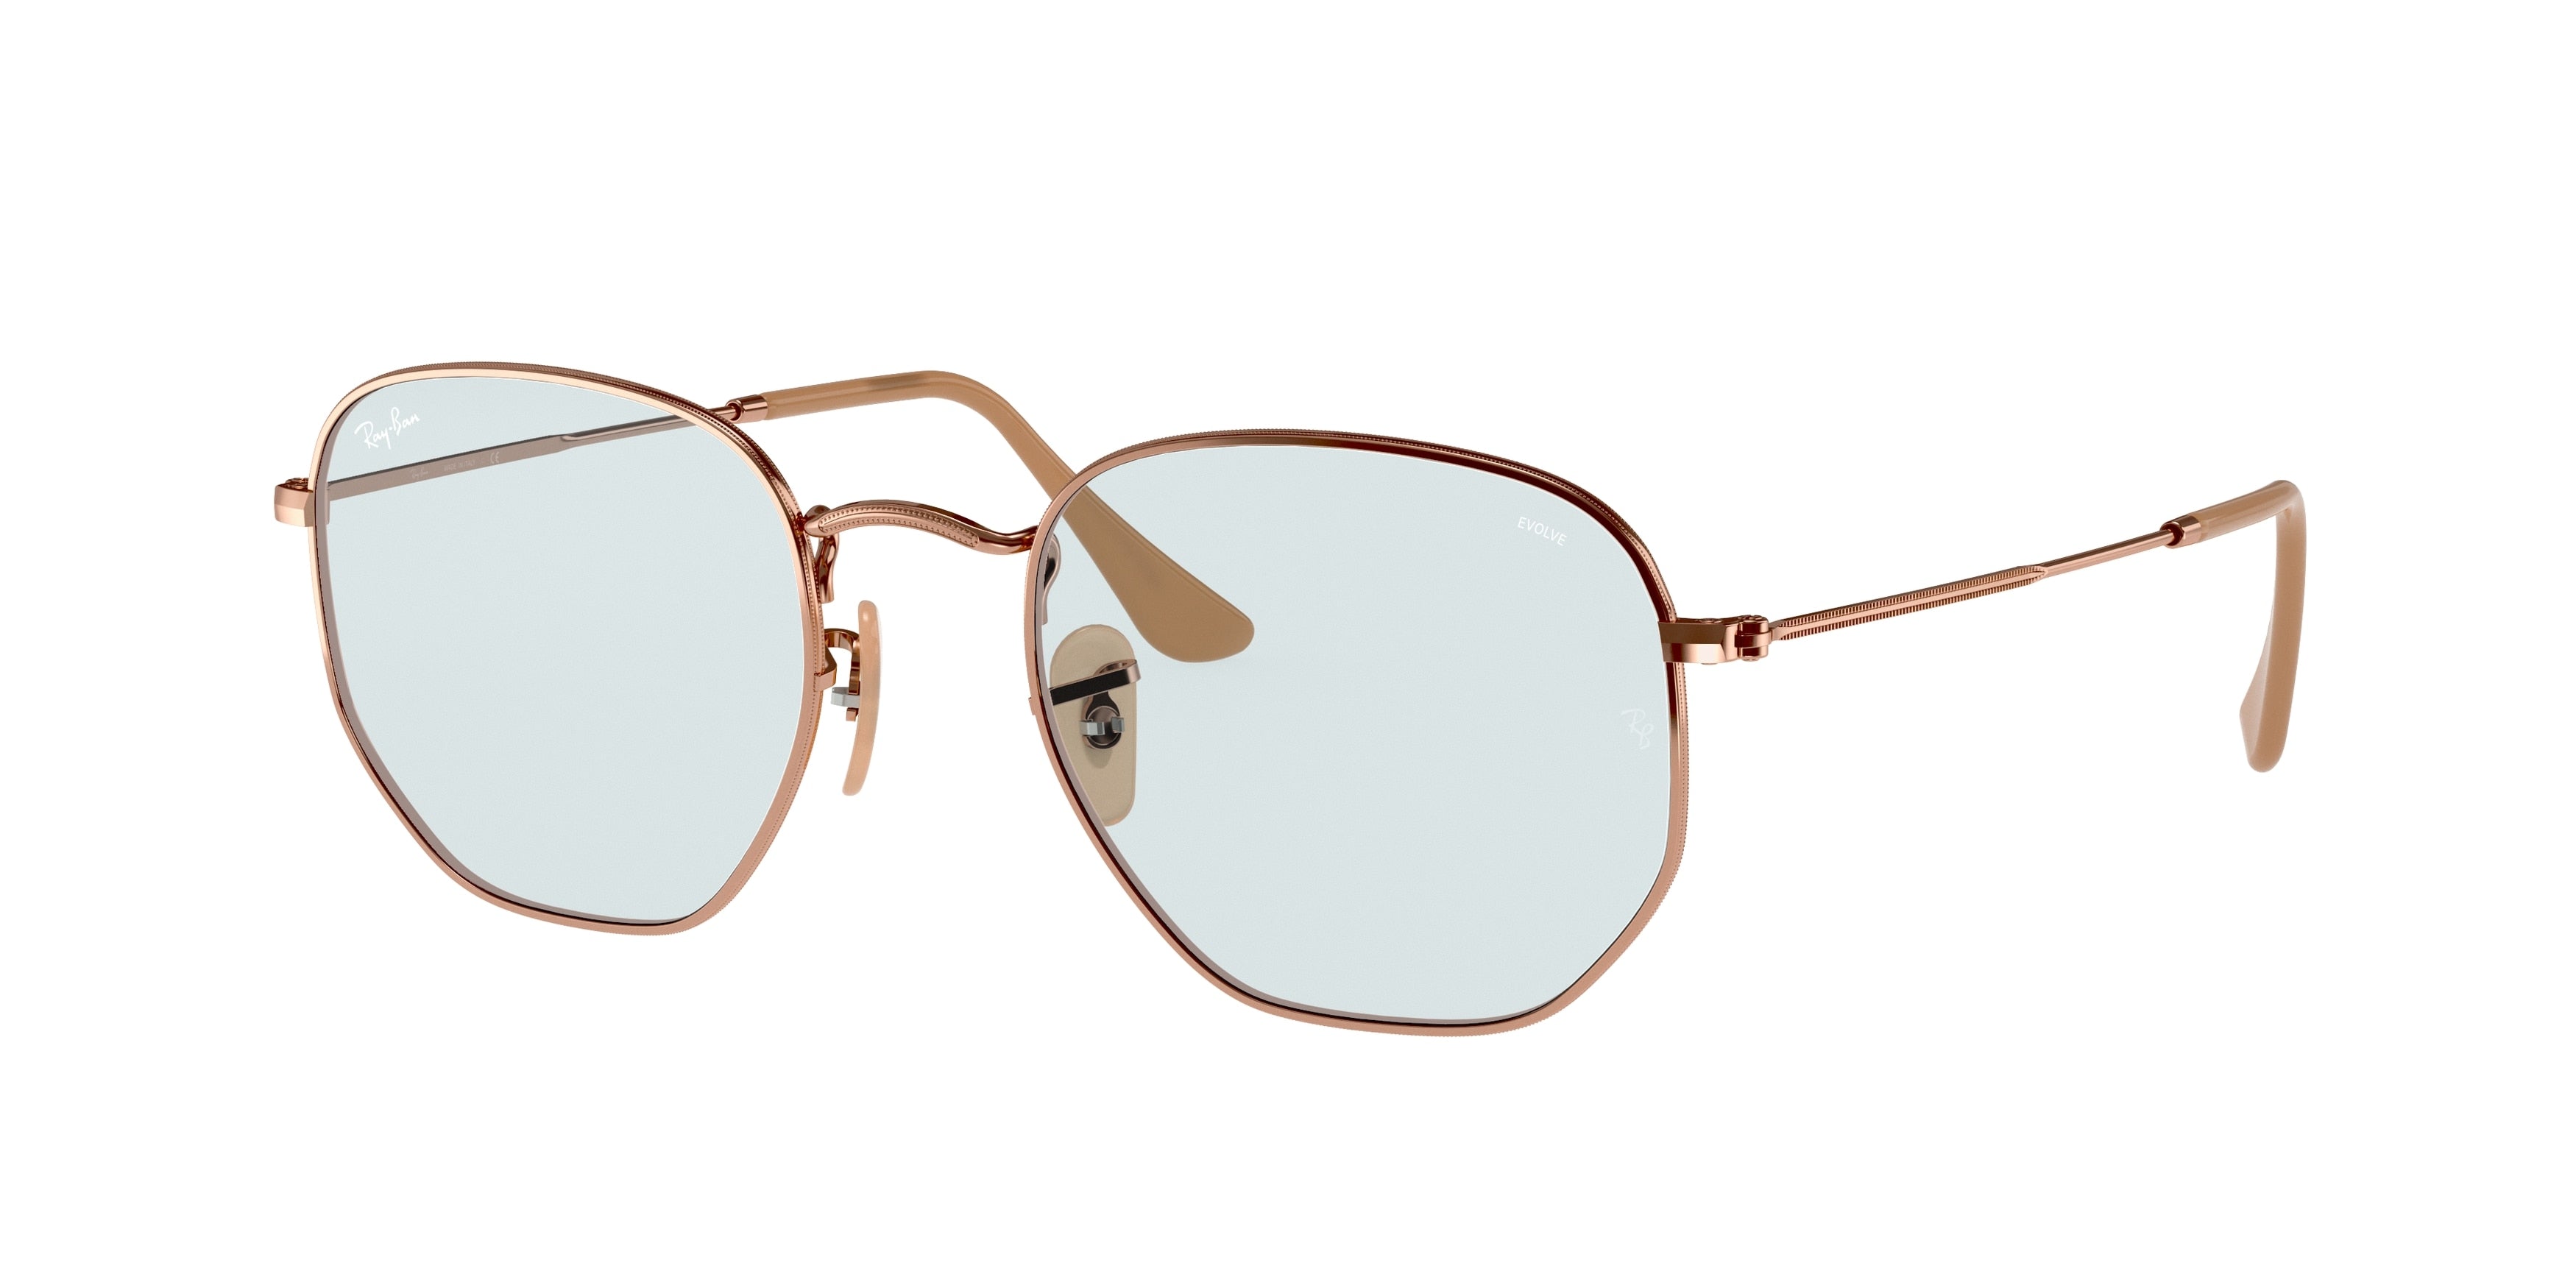 Ray-Ban HEXAGONAL RB3548N Irregular Sunglasses  91310Y-Copper 53-145-21 - Color Map Copper